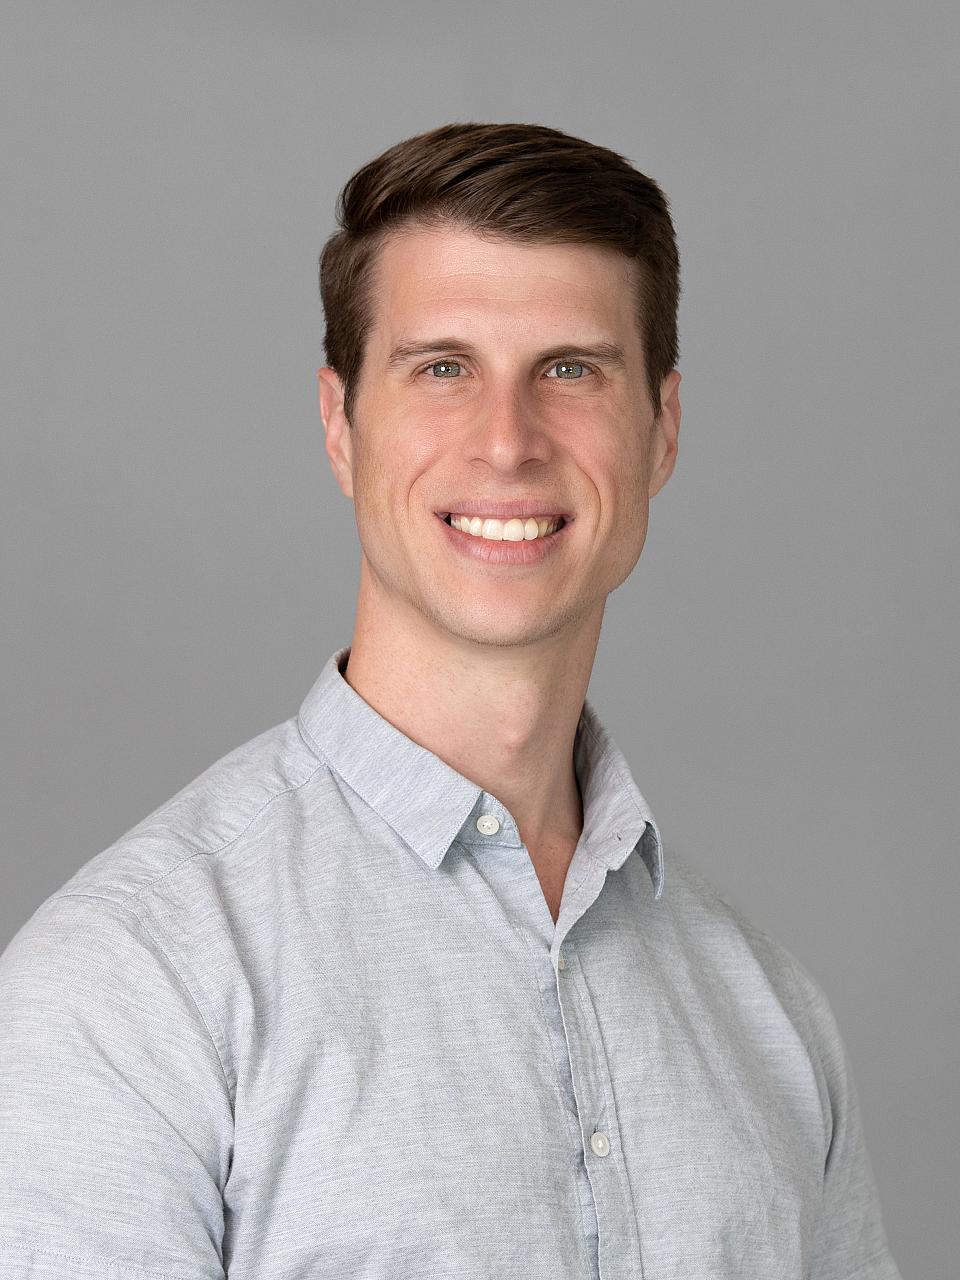 Photo of a man, Dr. Christian Klein, with short dark hair and a light gray shirt smiling at the camera.